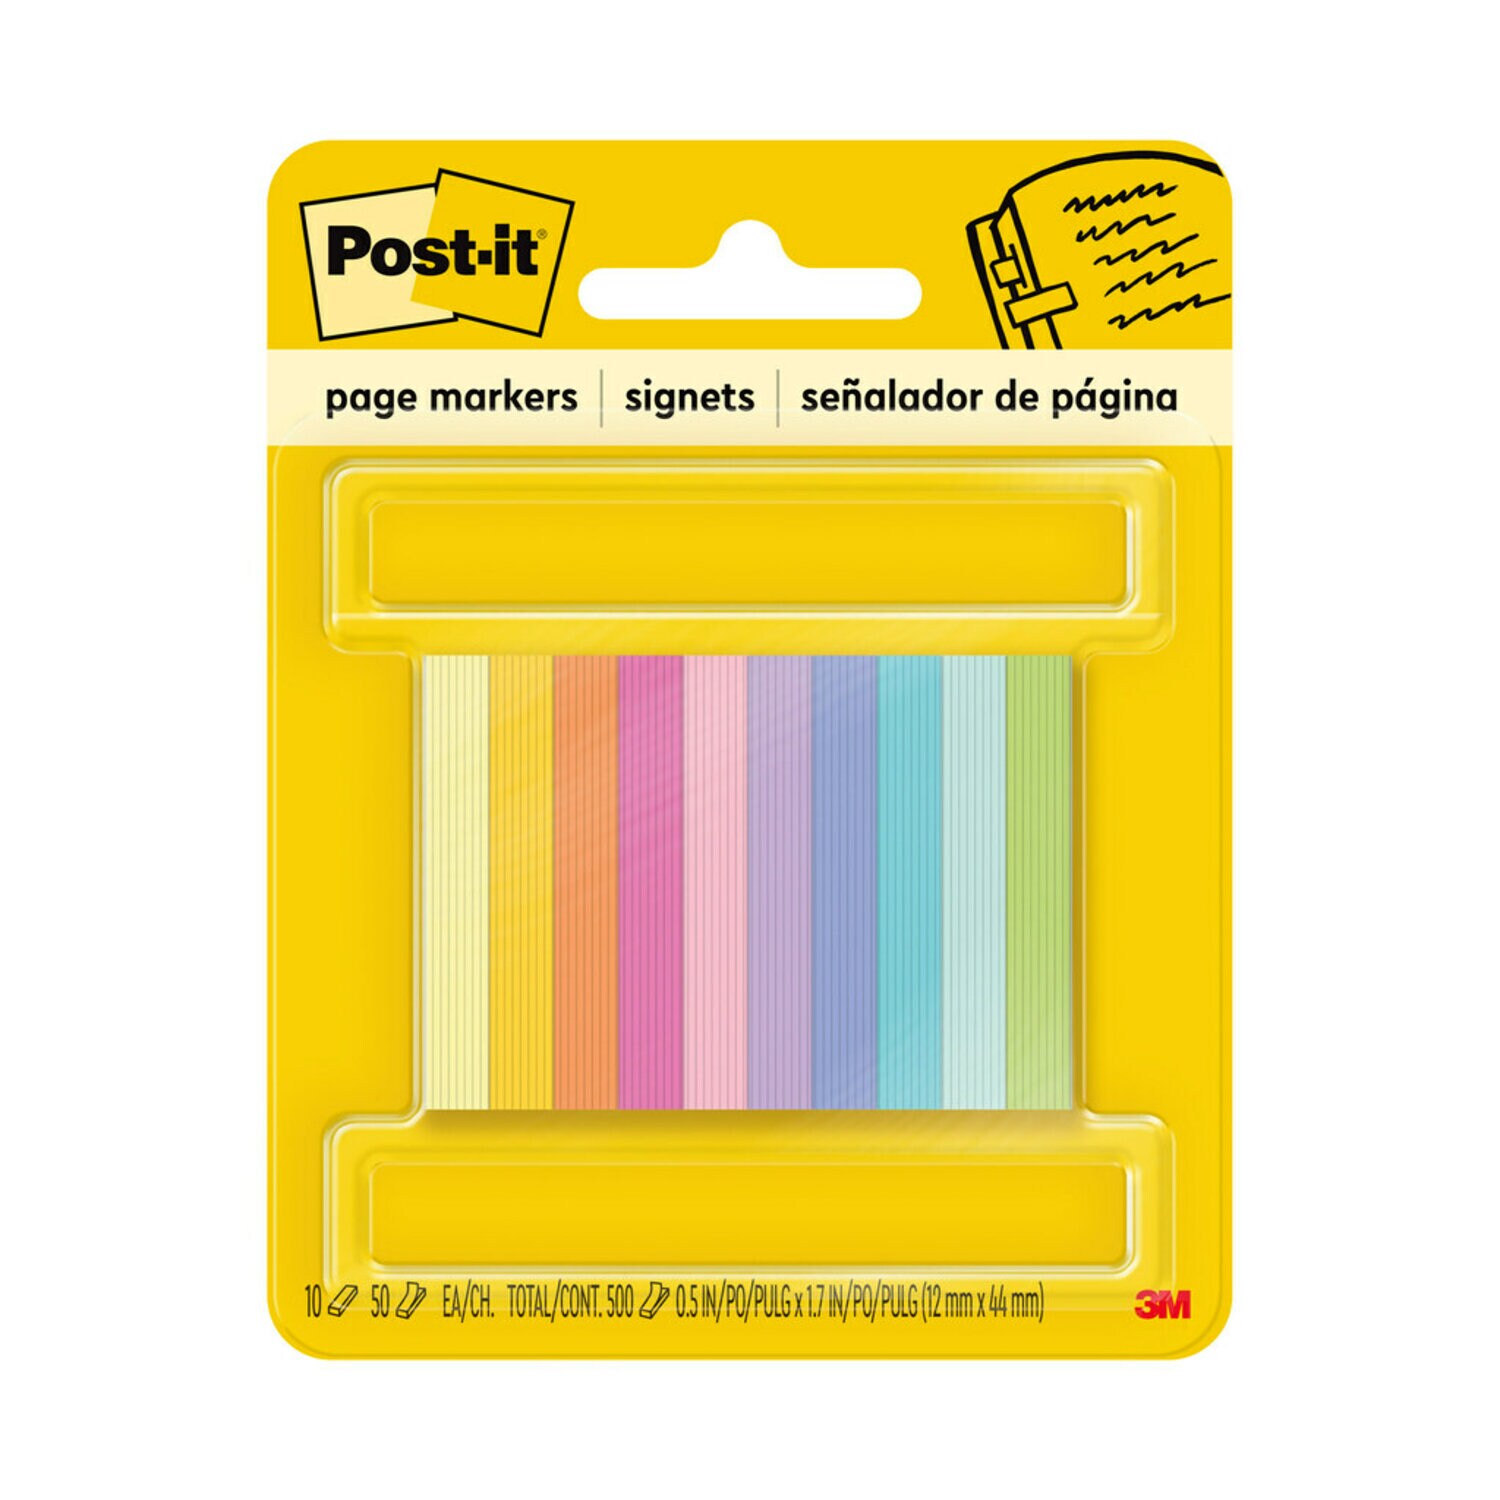 7100247676 - Post-it Page Marker 670-10AB, 1/2 in x 1 3/4 in (12,7 mm x 44,4 mm)